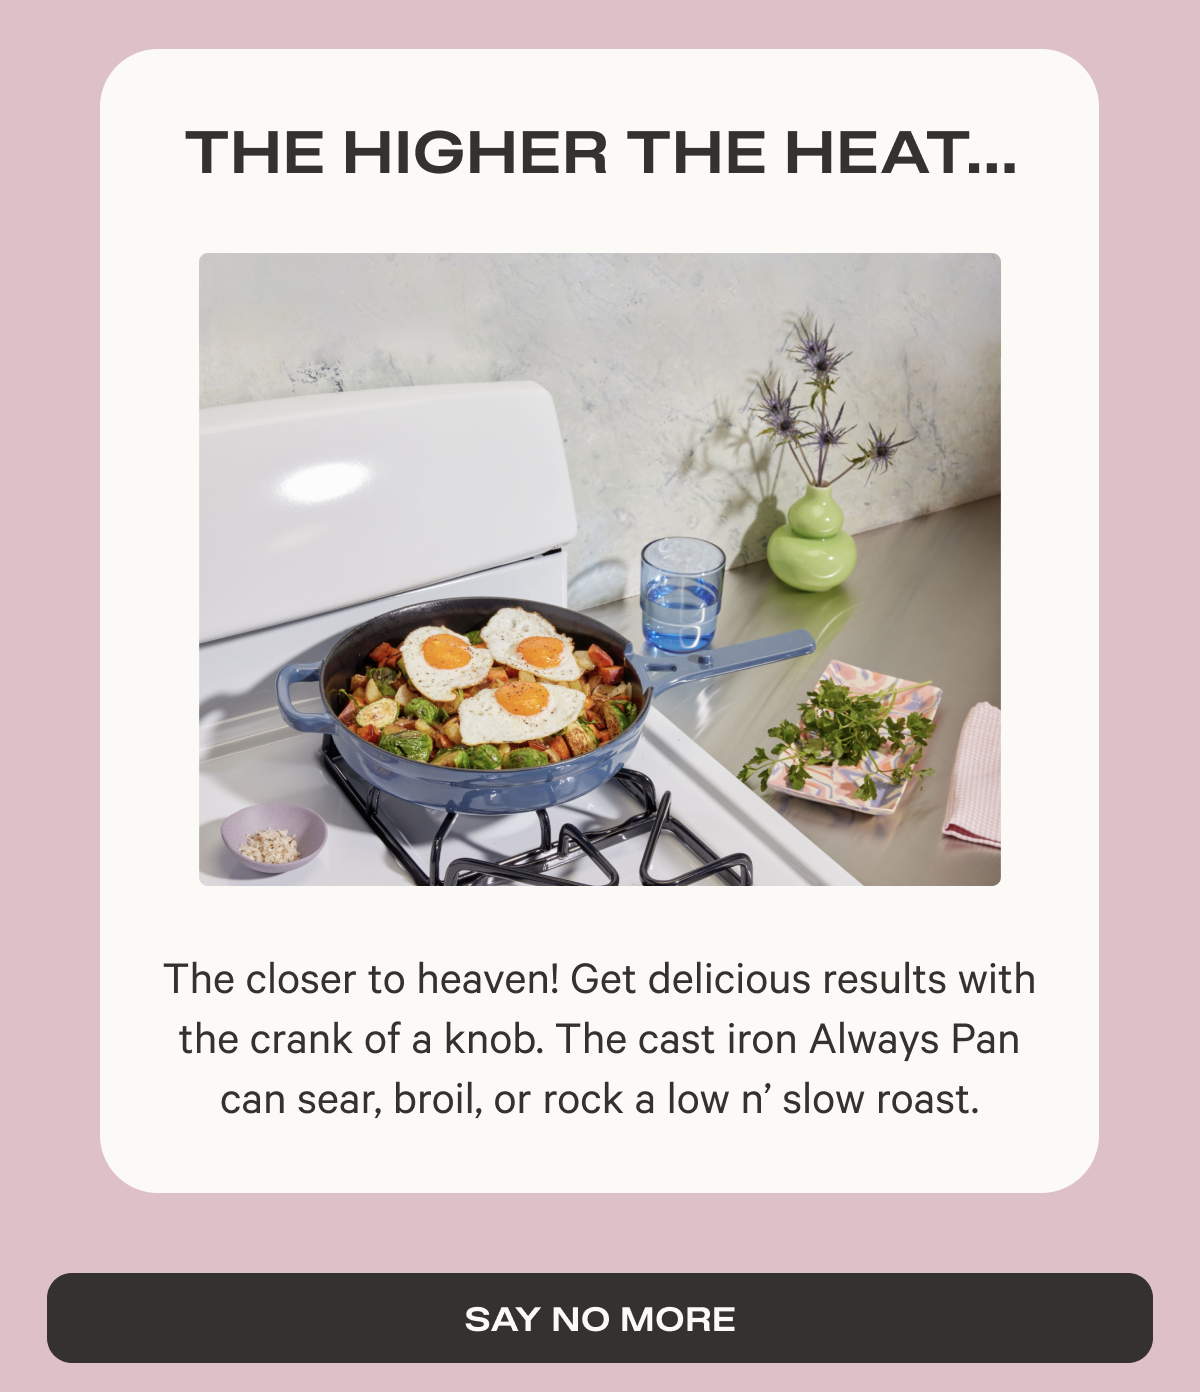 The higher the heat - The closer to heaven! Get delicious results with the crank of a knob. The cast iron Always Pan can sear, broil, or rock a low n’ slow roast. - Say no more